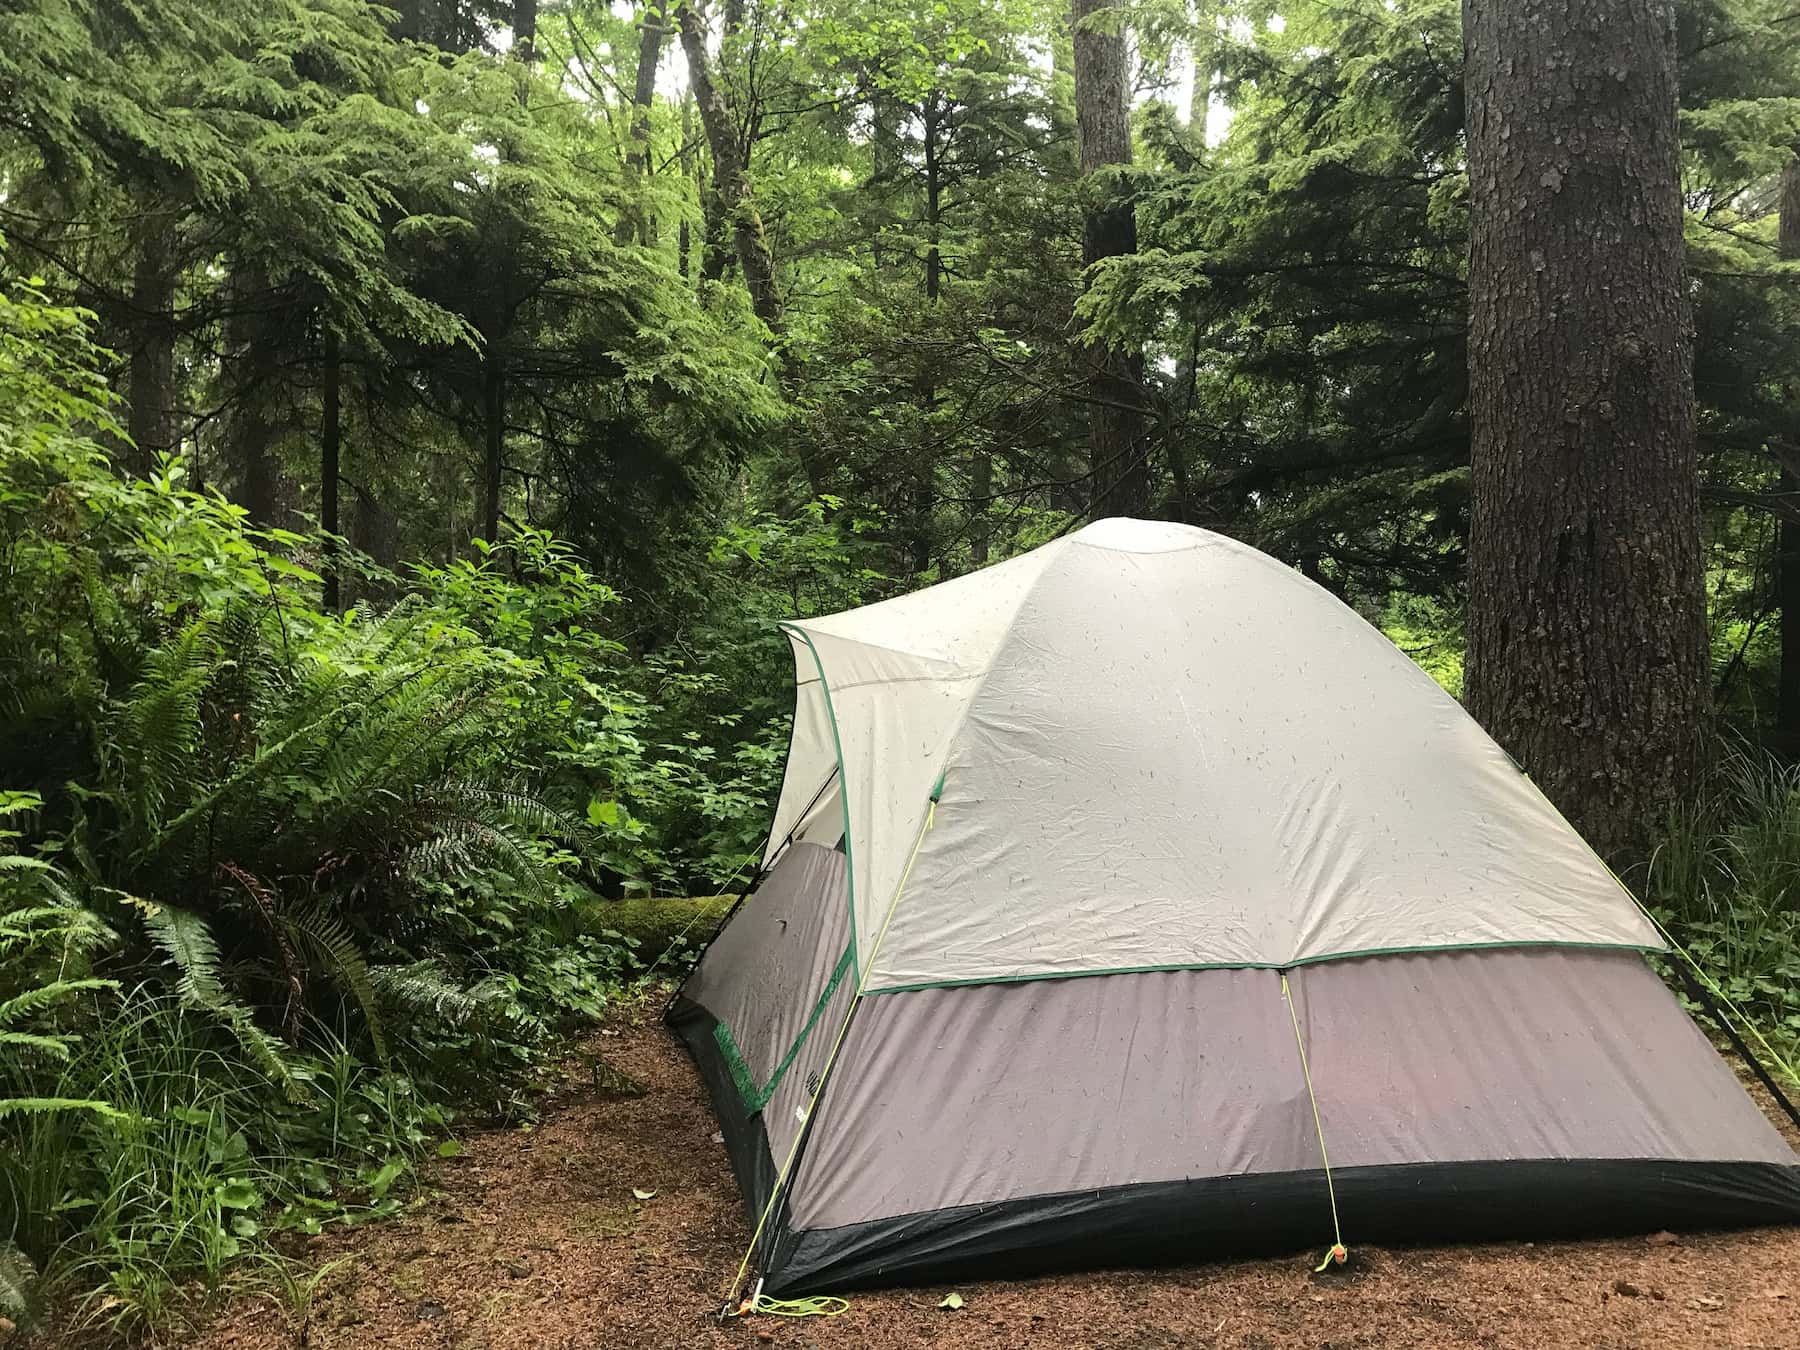 Green tent in the lush Olympic National Forest.